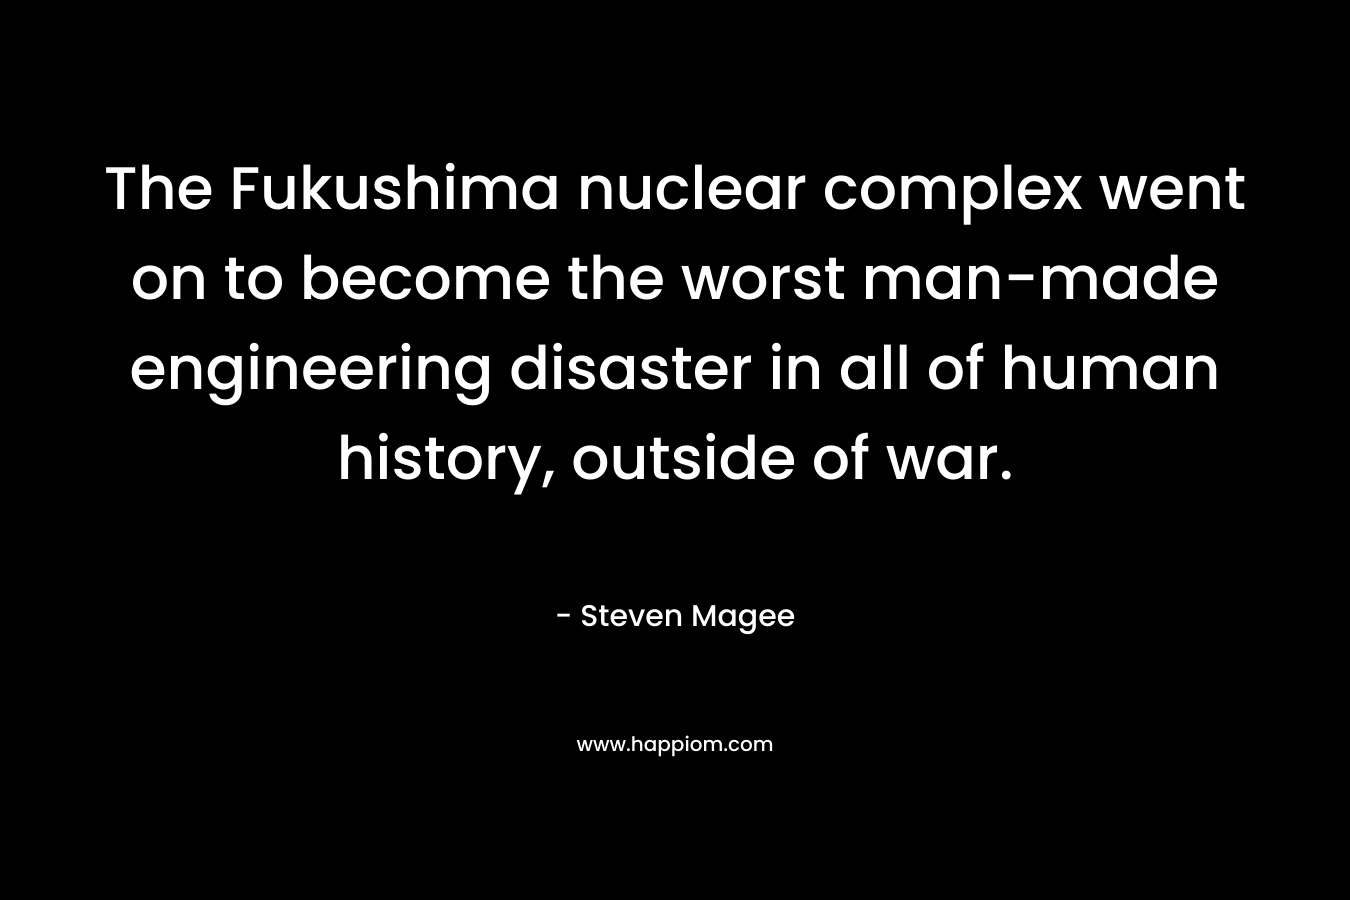 The Fukushima nuclear complex went on to become the worst man-made engineering disaster in all of human history, outside of war. – Steven Magee